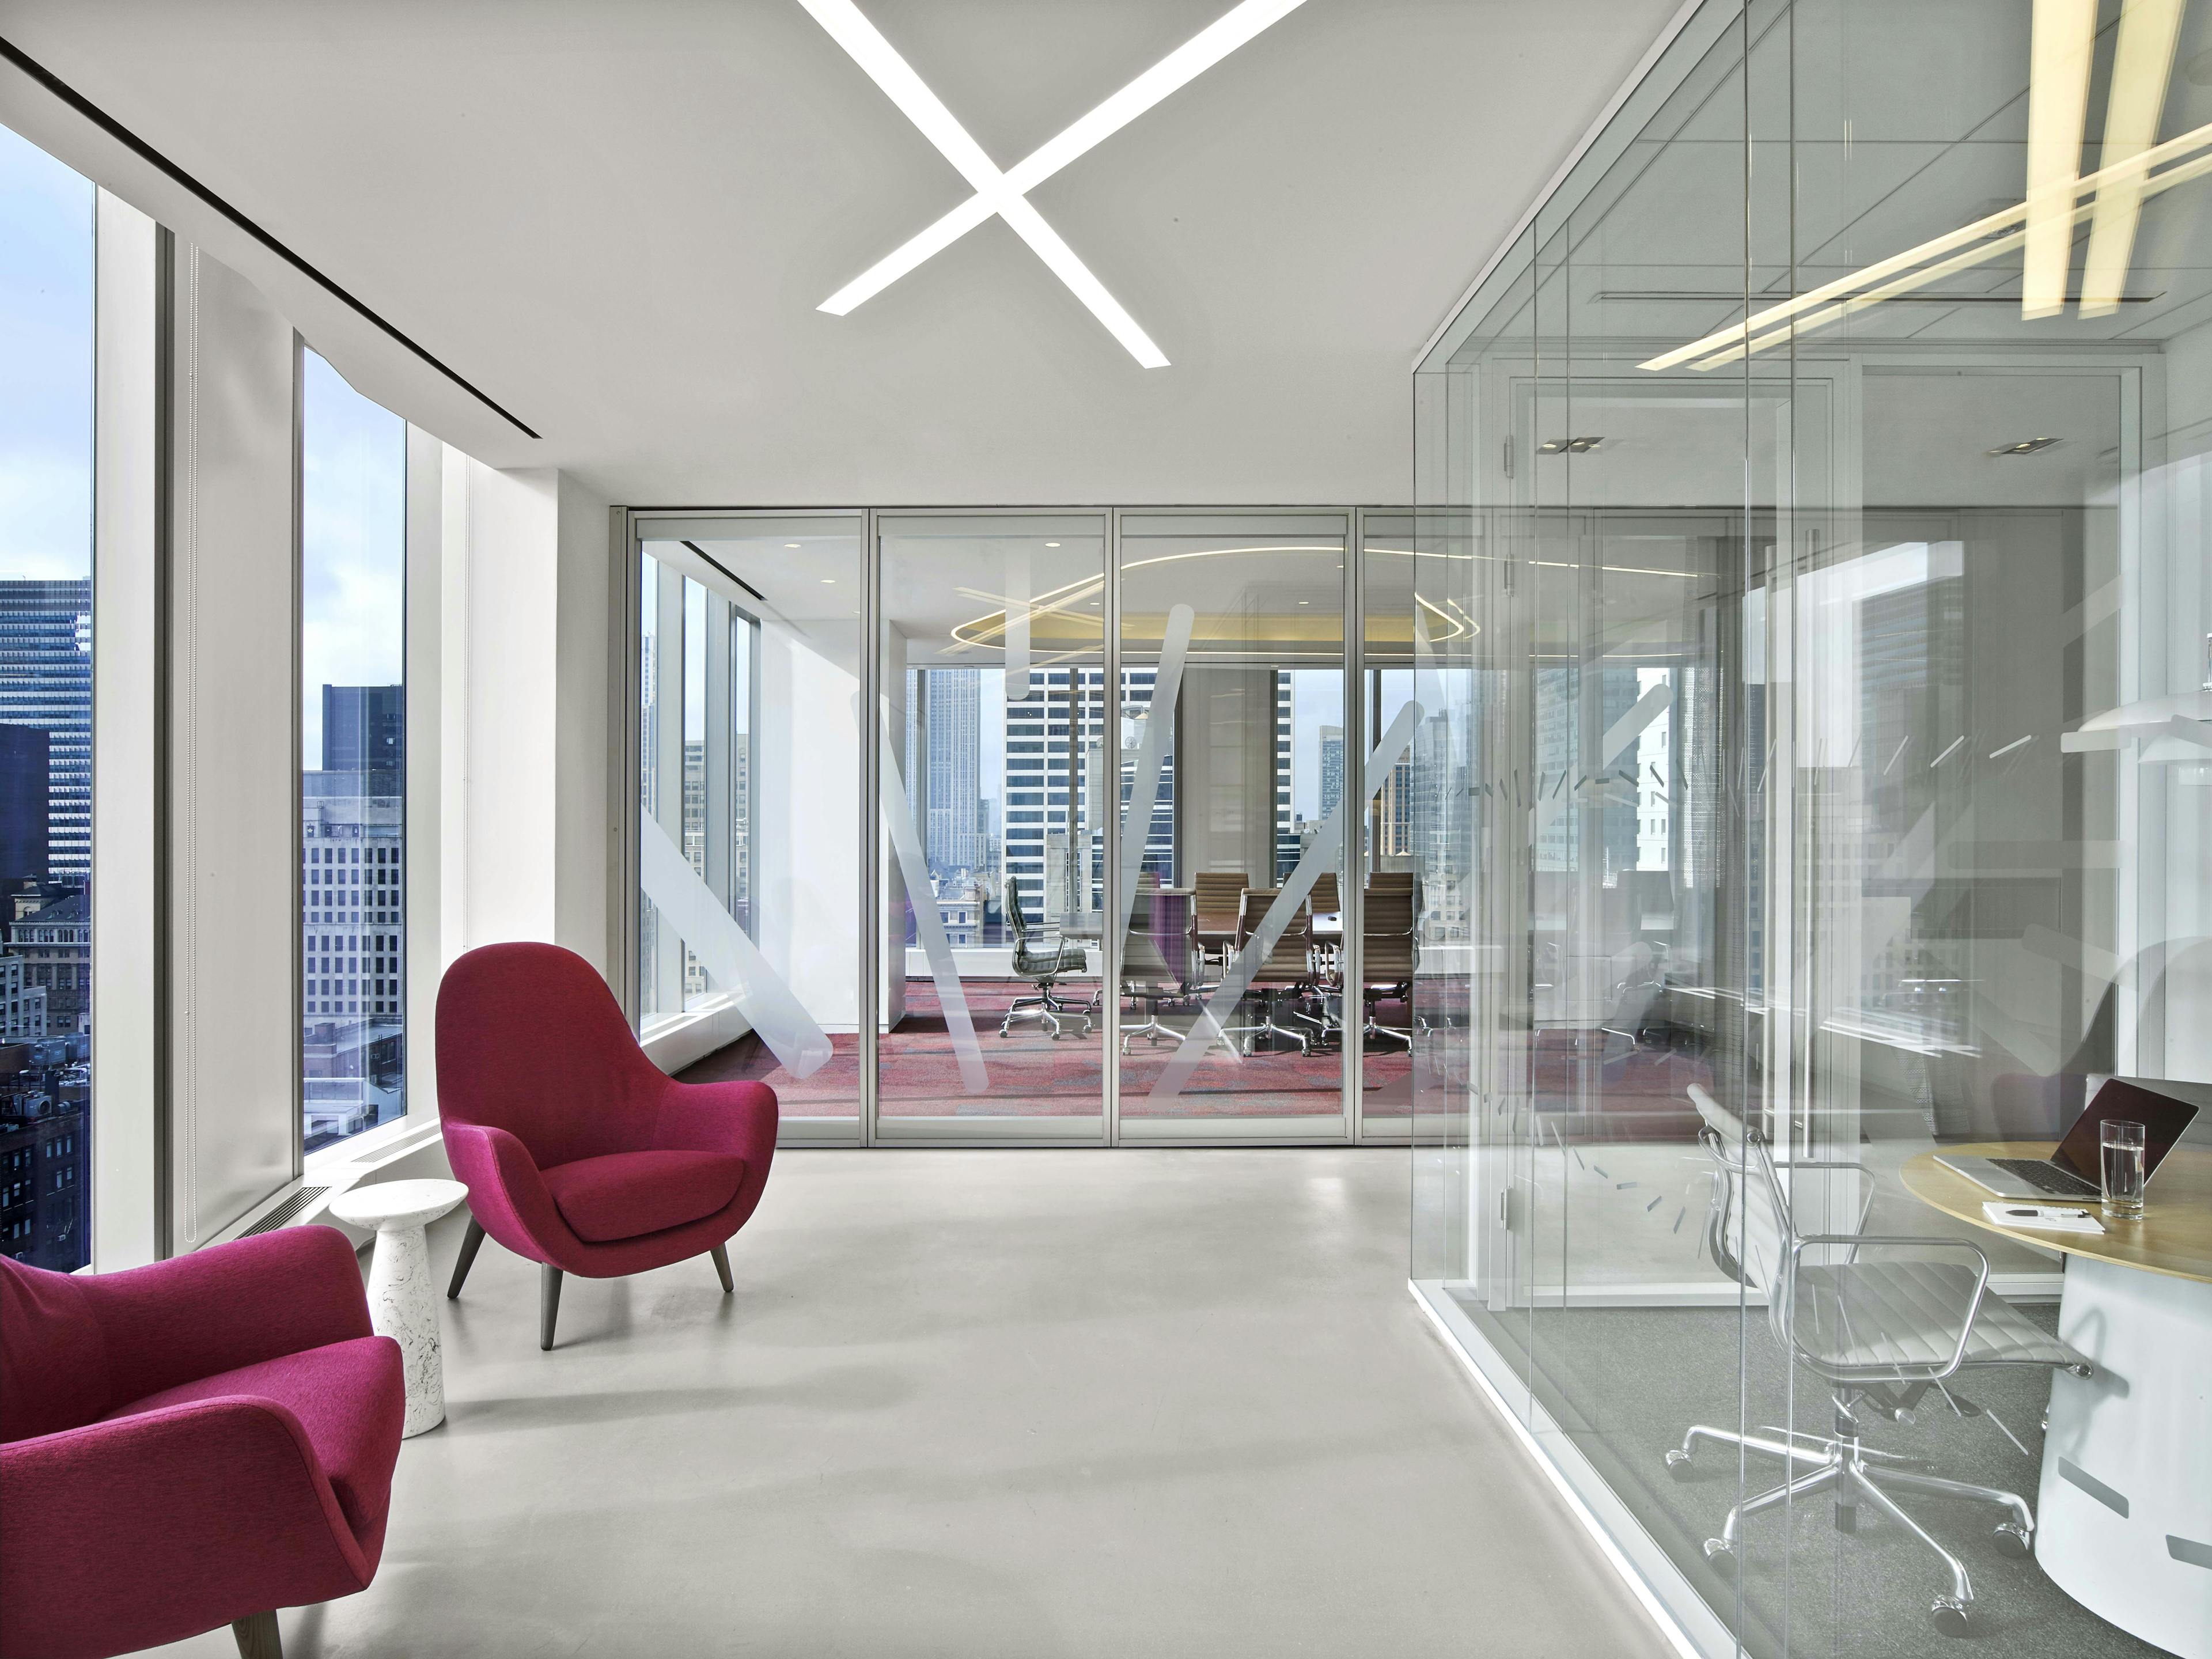 Seating area in Nixon Peabody's New York City office; two fuchsia easy chairs sit alongside picture windows to the left, a small occasional table between them; directly behind is an empty conference room with glass walls and an oblong table surrounded by chairs; on the right can be seen part of another, smaller, glass-enclosed conference room